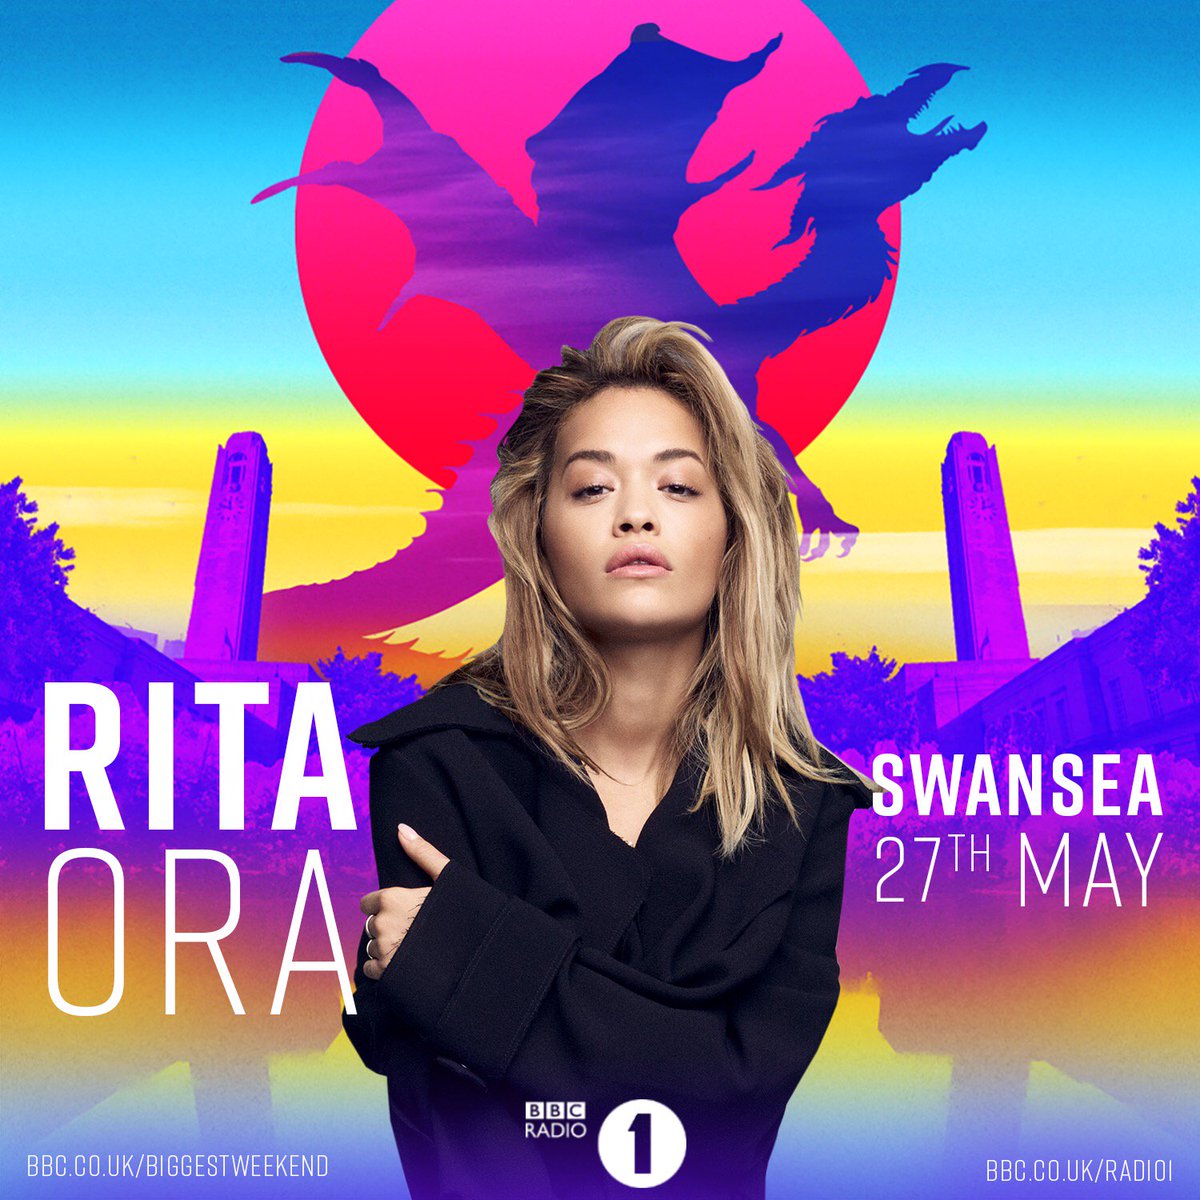 Come see me at the #BiggestWeekend 27th May in Swansea!!!✨????????❤️????https://t.co/1Cx6xakAQG ❤️❤️❤️❤️ https://t.co/vtOcrCwiv8